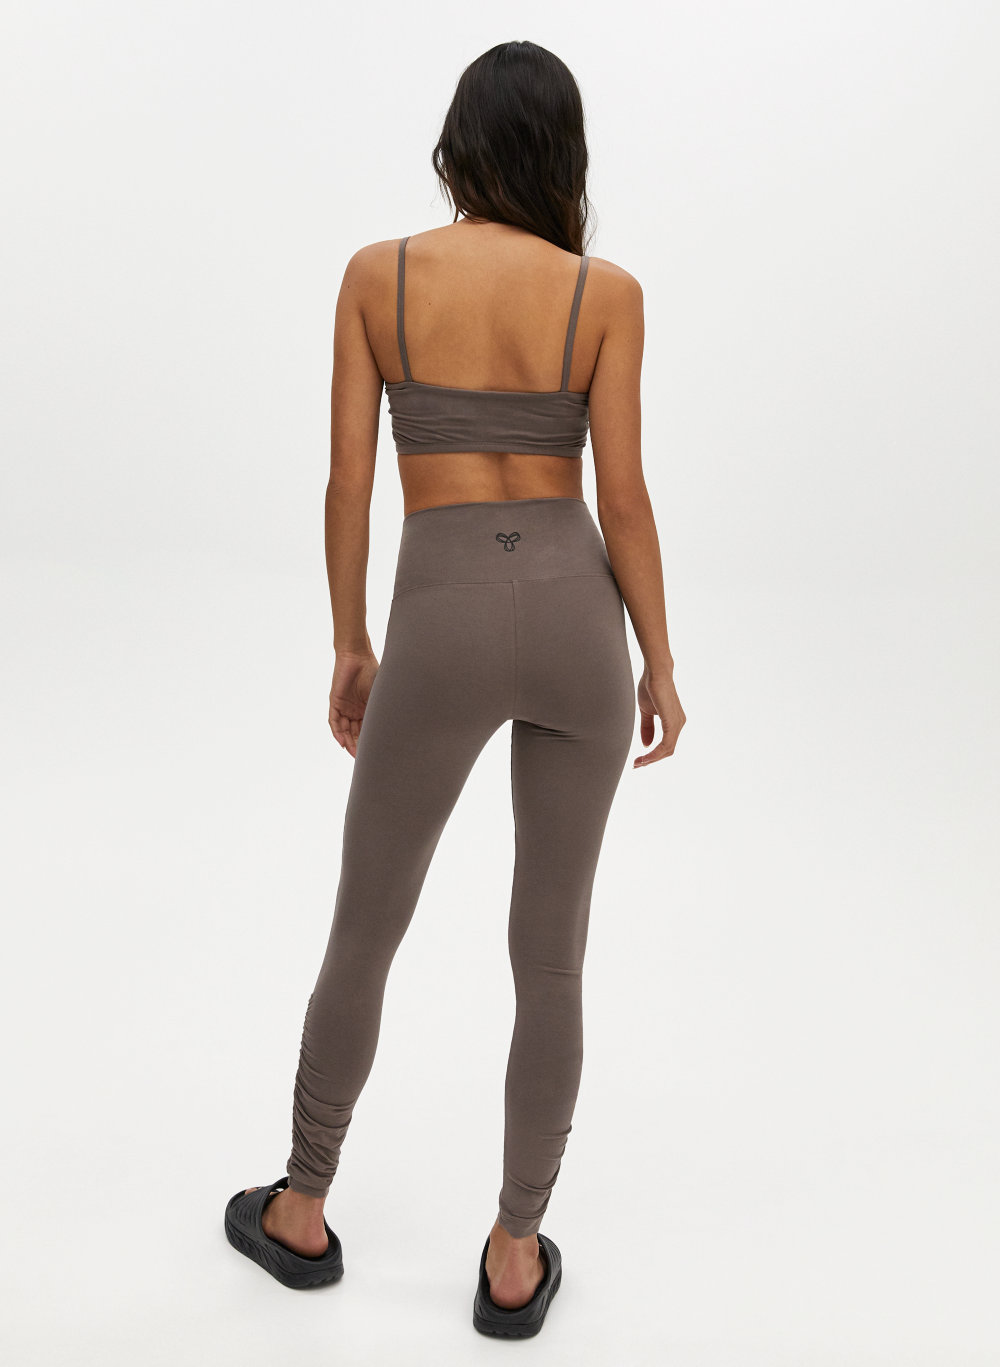 I Tried The Artizia TNA Butter Leggings To See If They Are Dupes For The Lululemon  Aligns 